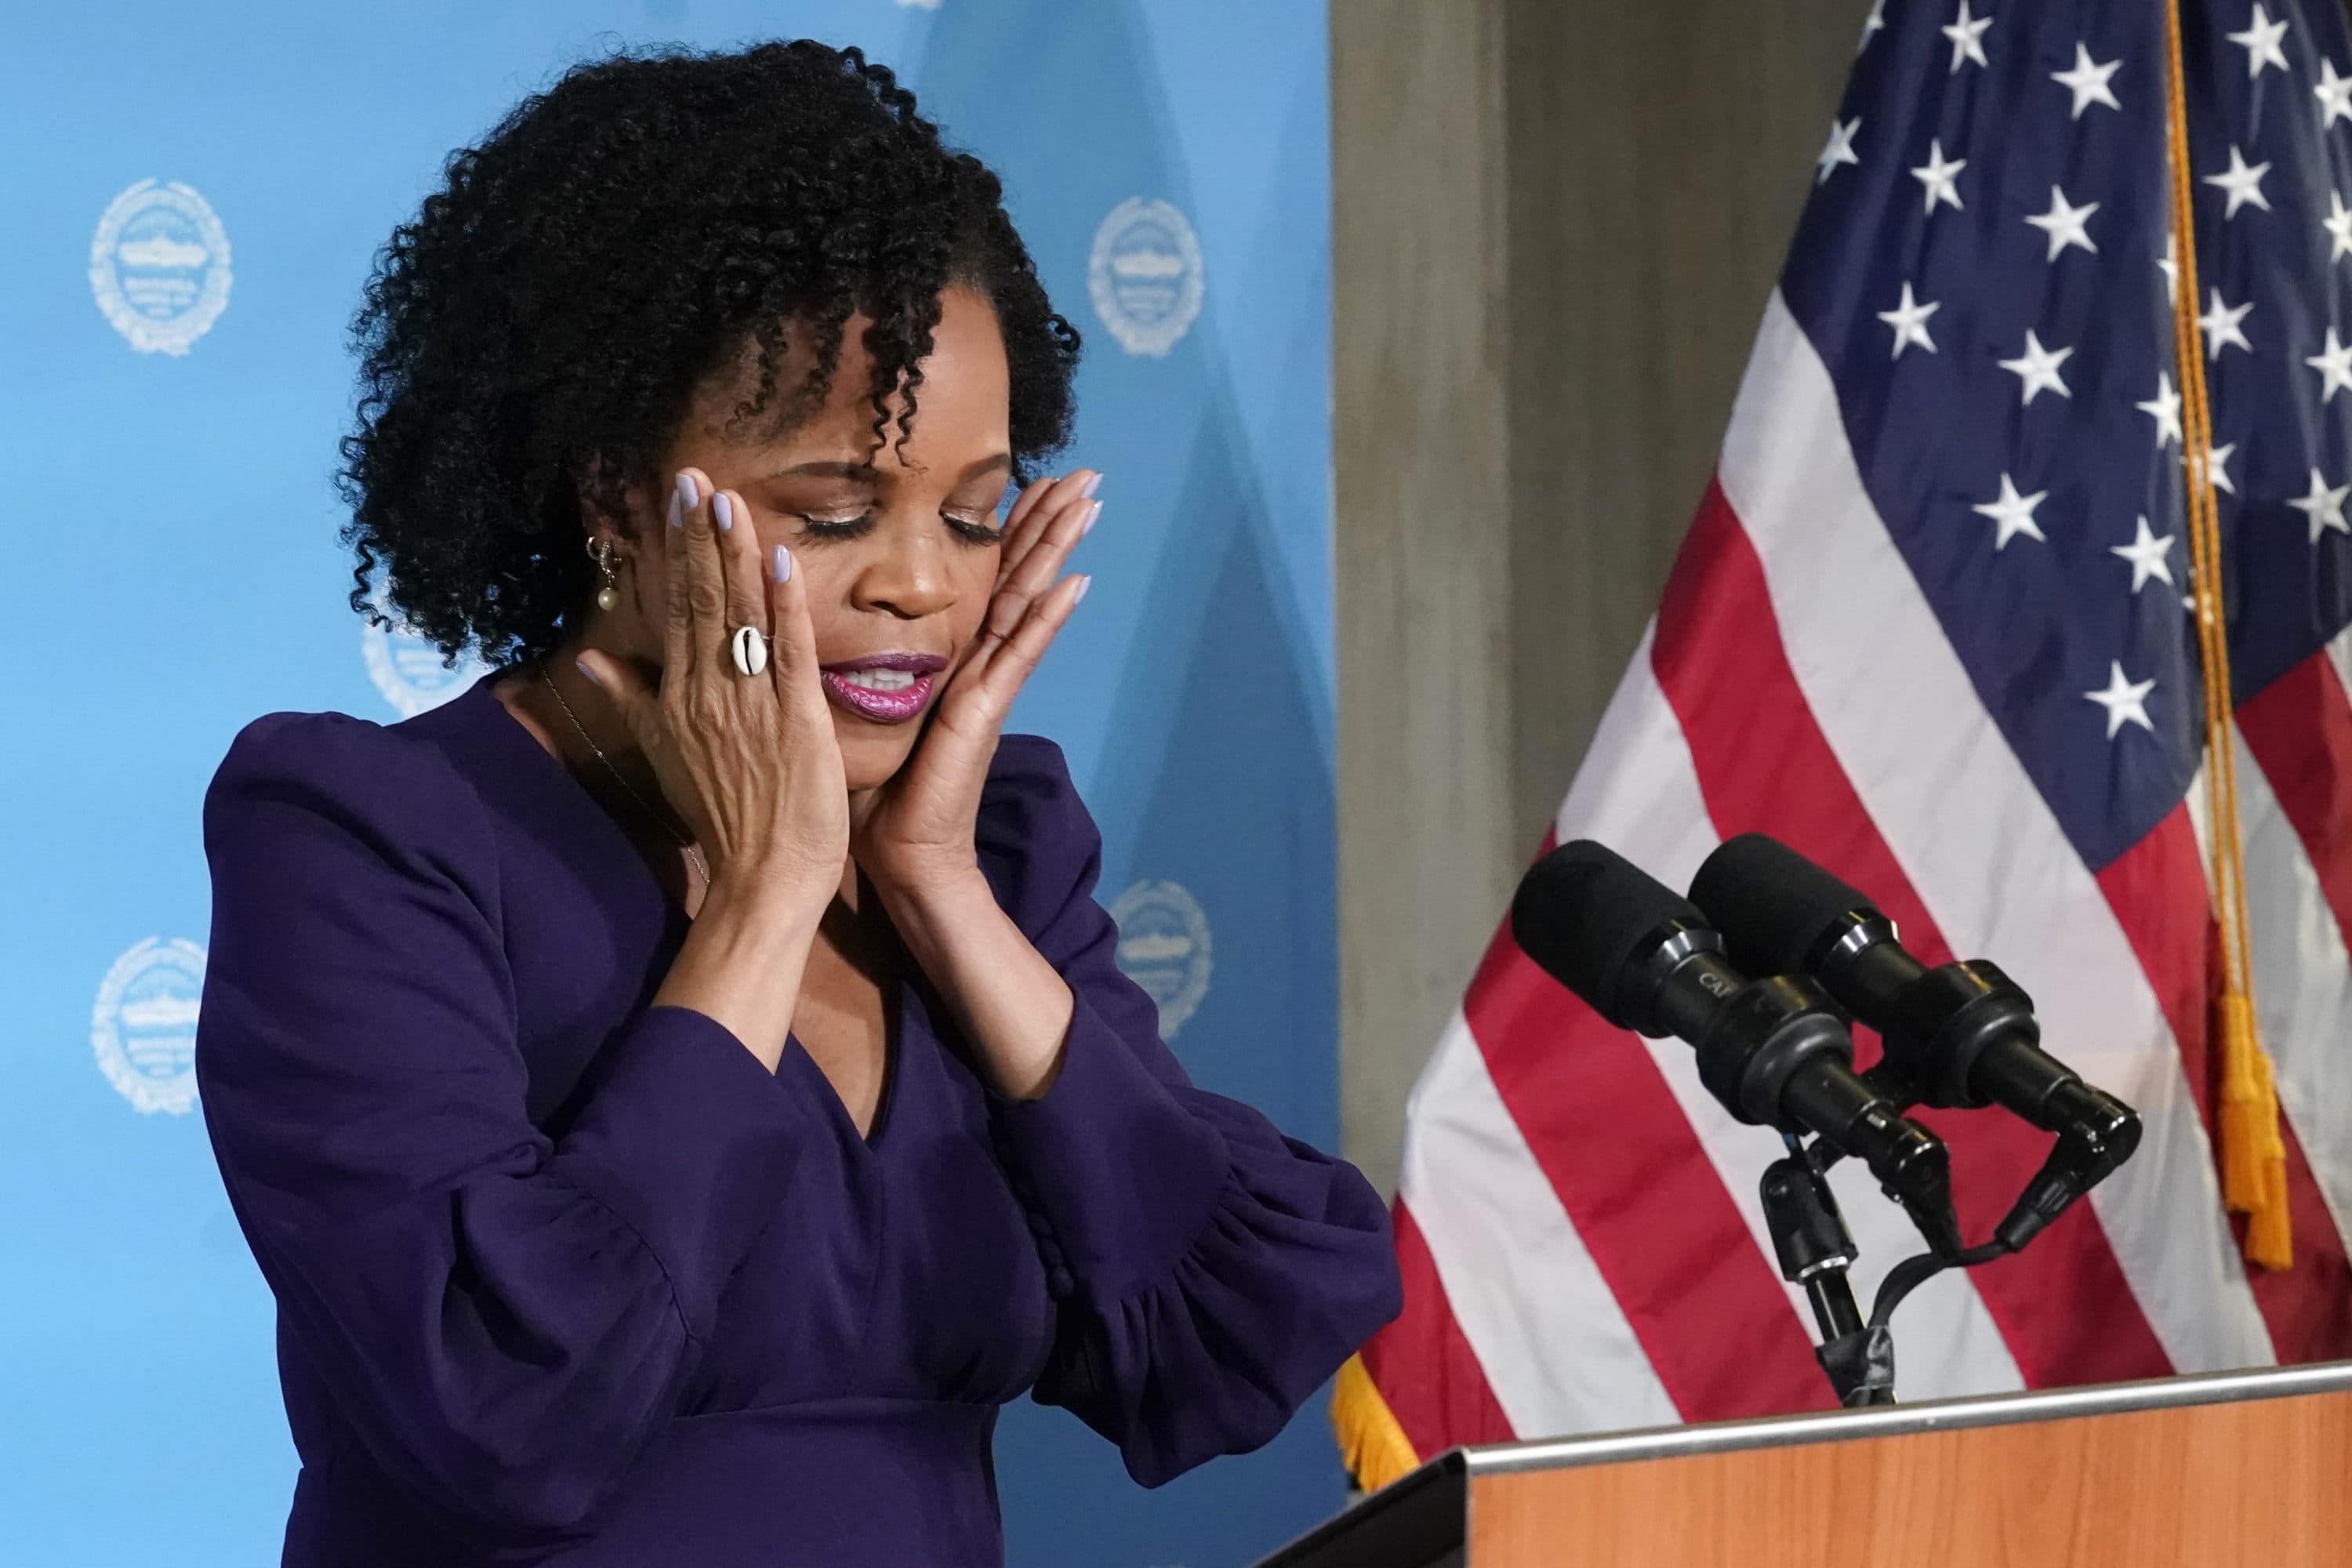 Former Boston City Council President Kim Janey, 55, composes herself as she begins to speak after being sworn in as Boston's new mayor at City Hall, Wednesday, March 24, 2021, in Boston. (Elise Amendola/AP)